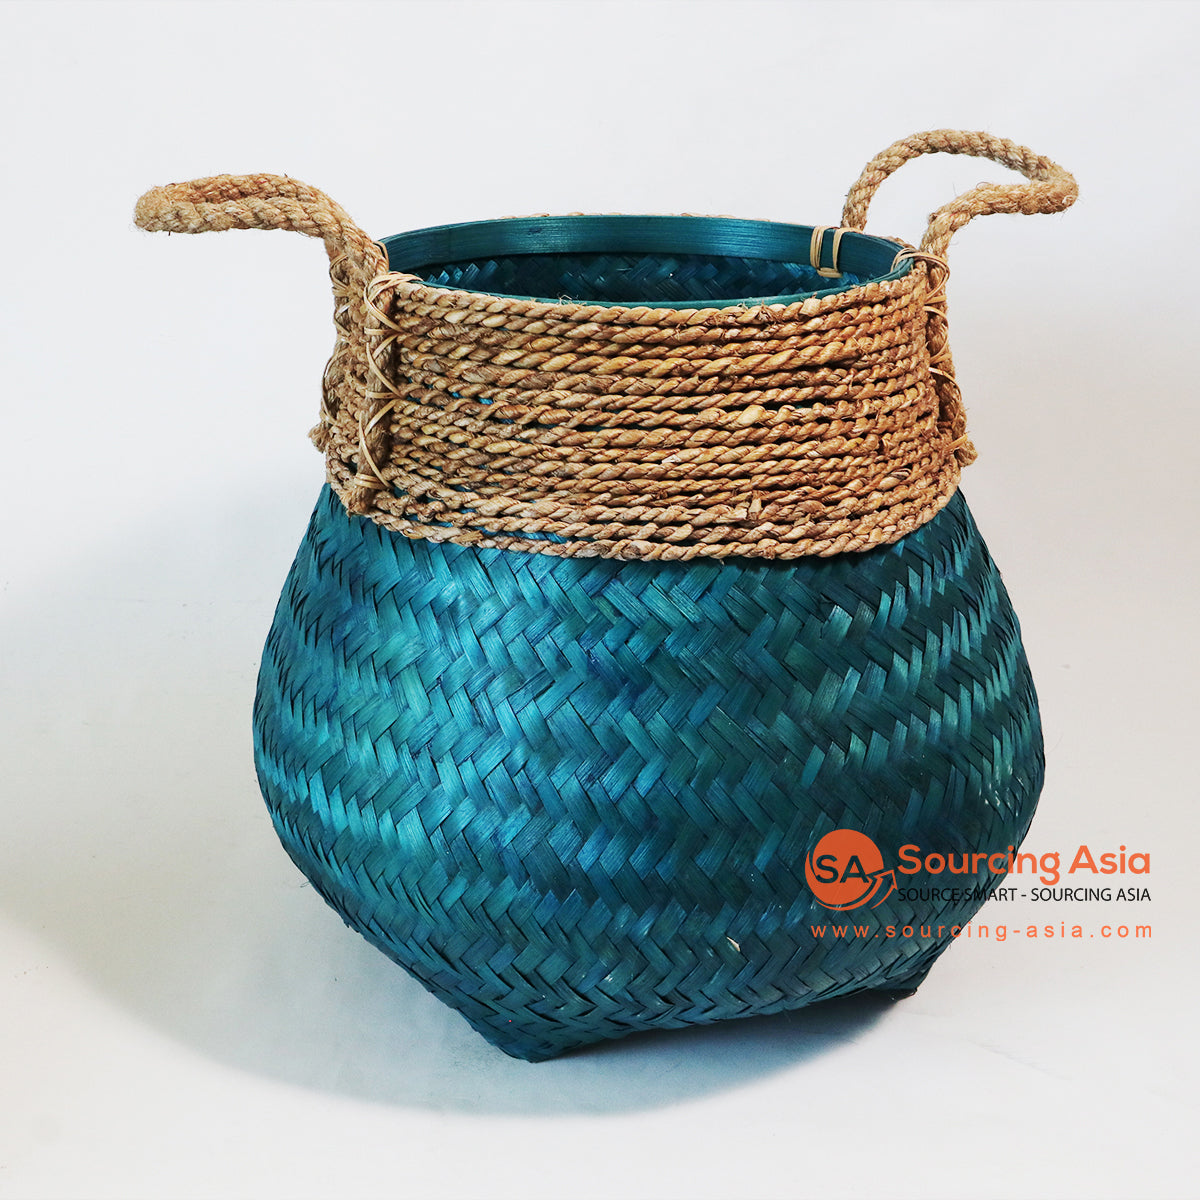 MTIC001 BLUE BAMBOO BASKET WITH NATURAL EDGE AND HANDLE